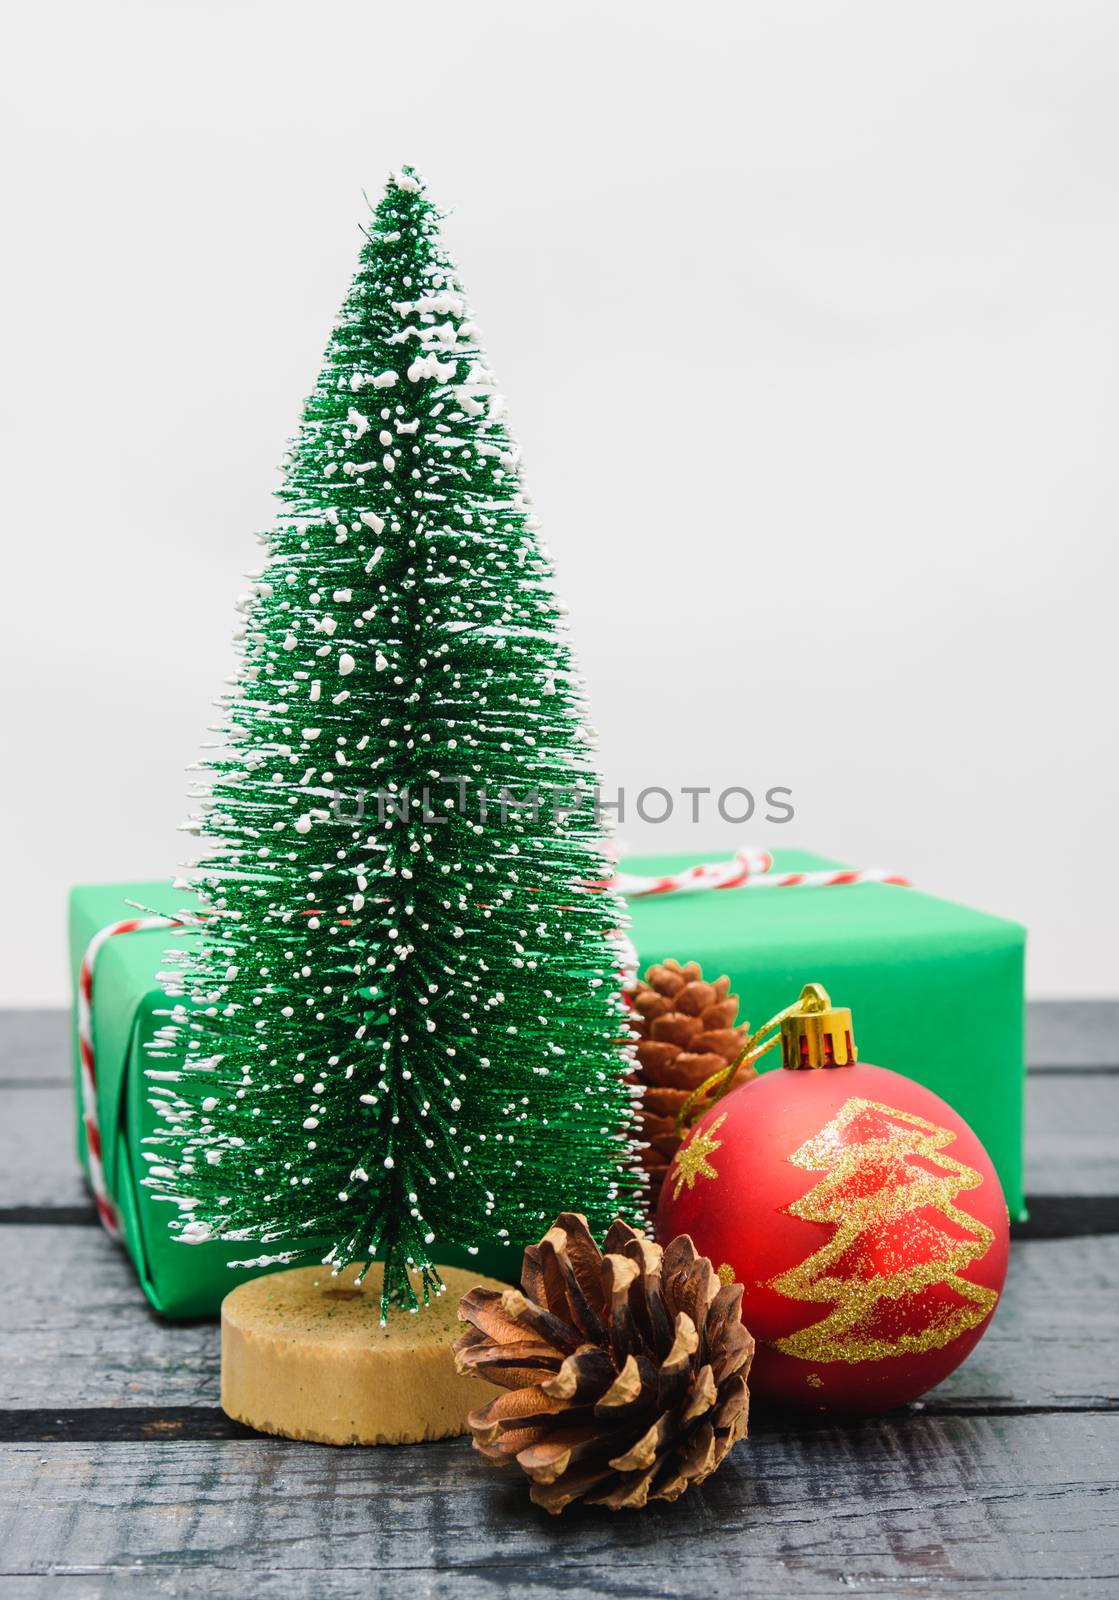 Christmas composition decorations, minimal green fir tree branches with snow on white background. Merry Christmas concept. Copy space for text